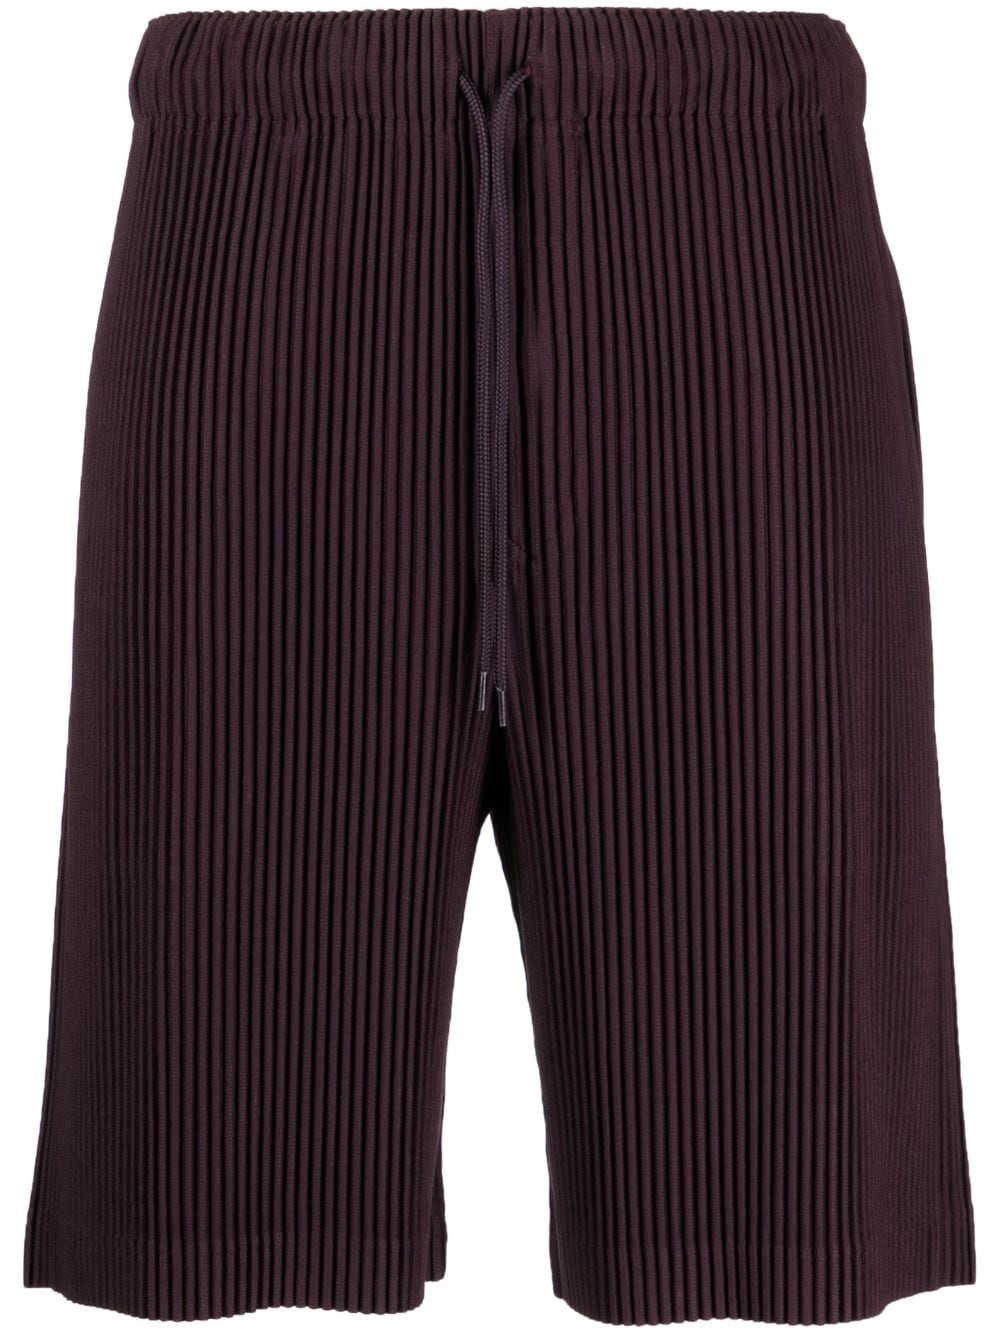 Image 1 of Homme Plissé Issey Miyake Color Pleats drawstring shorts